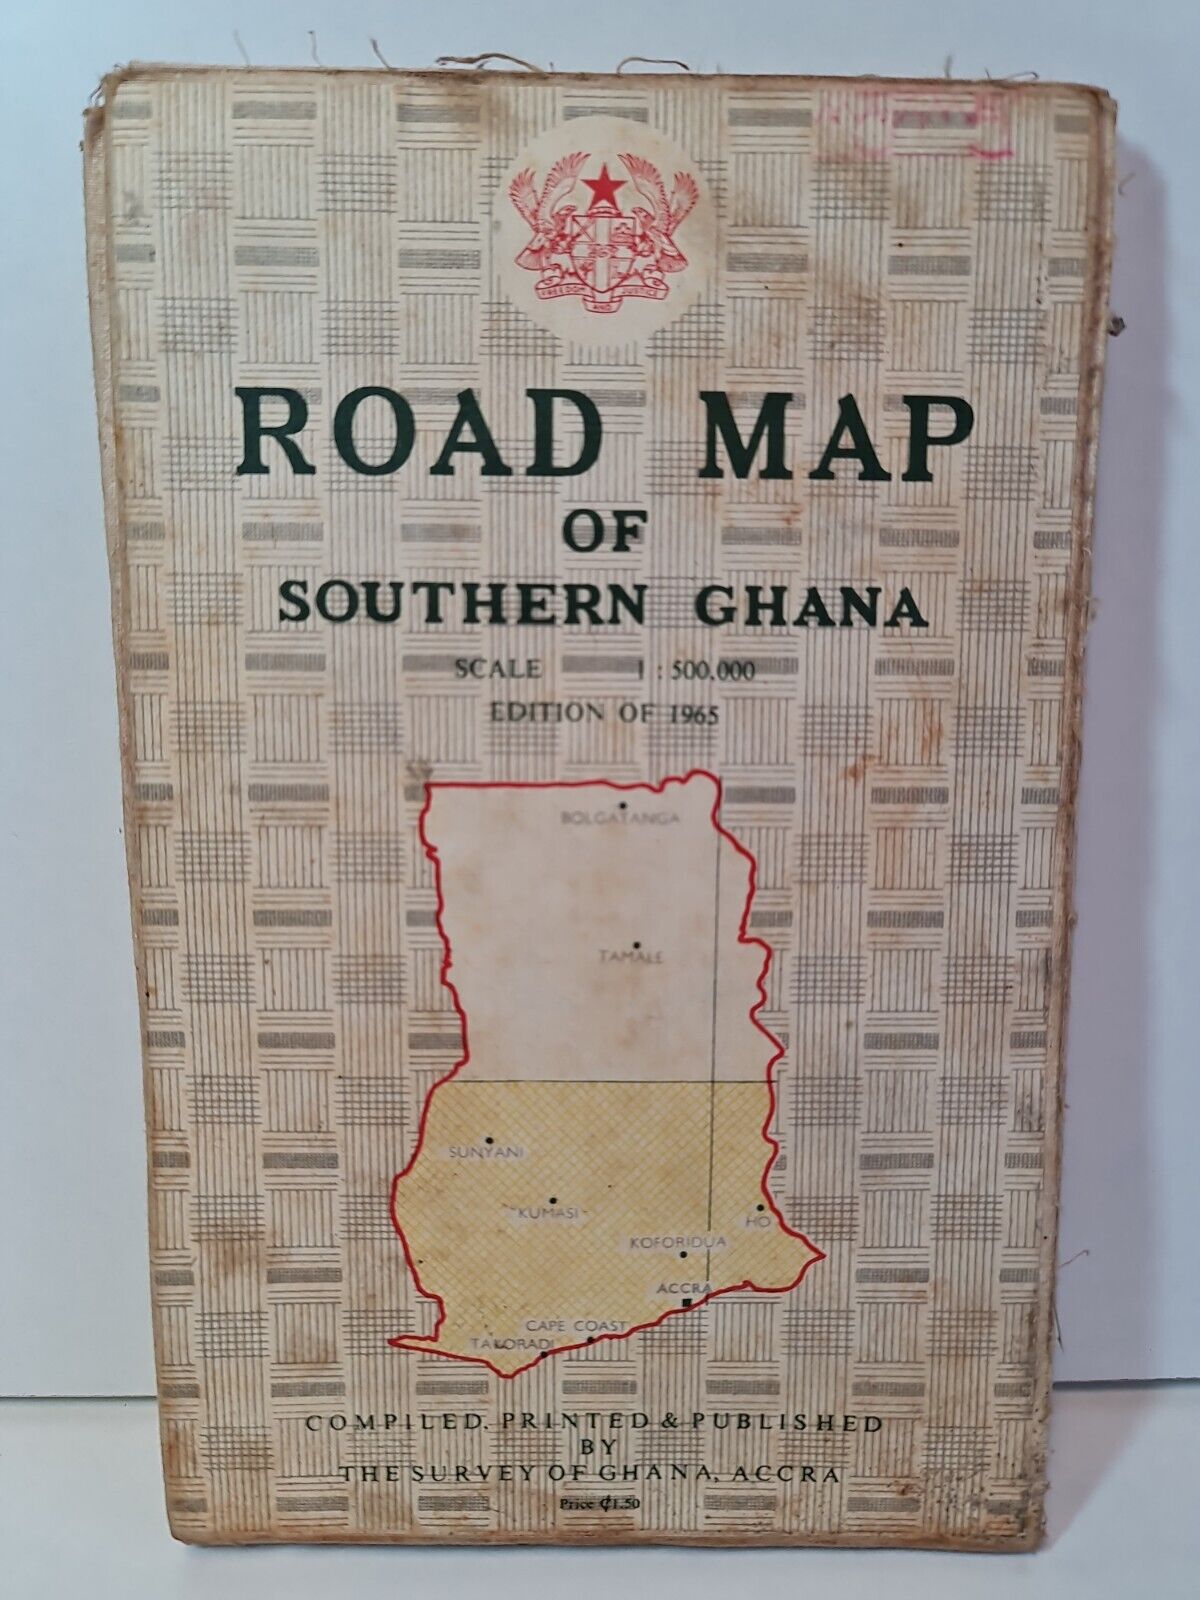 Road Map of Southern Ghana (1965 edition)